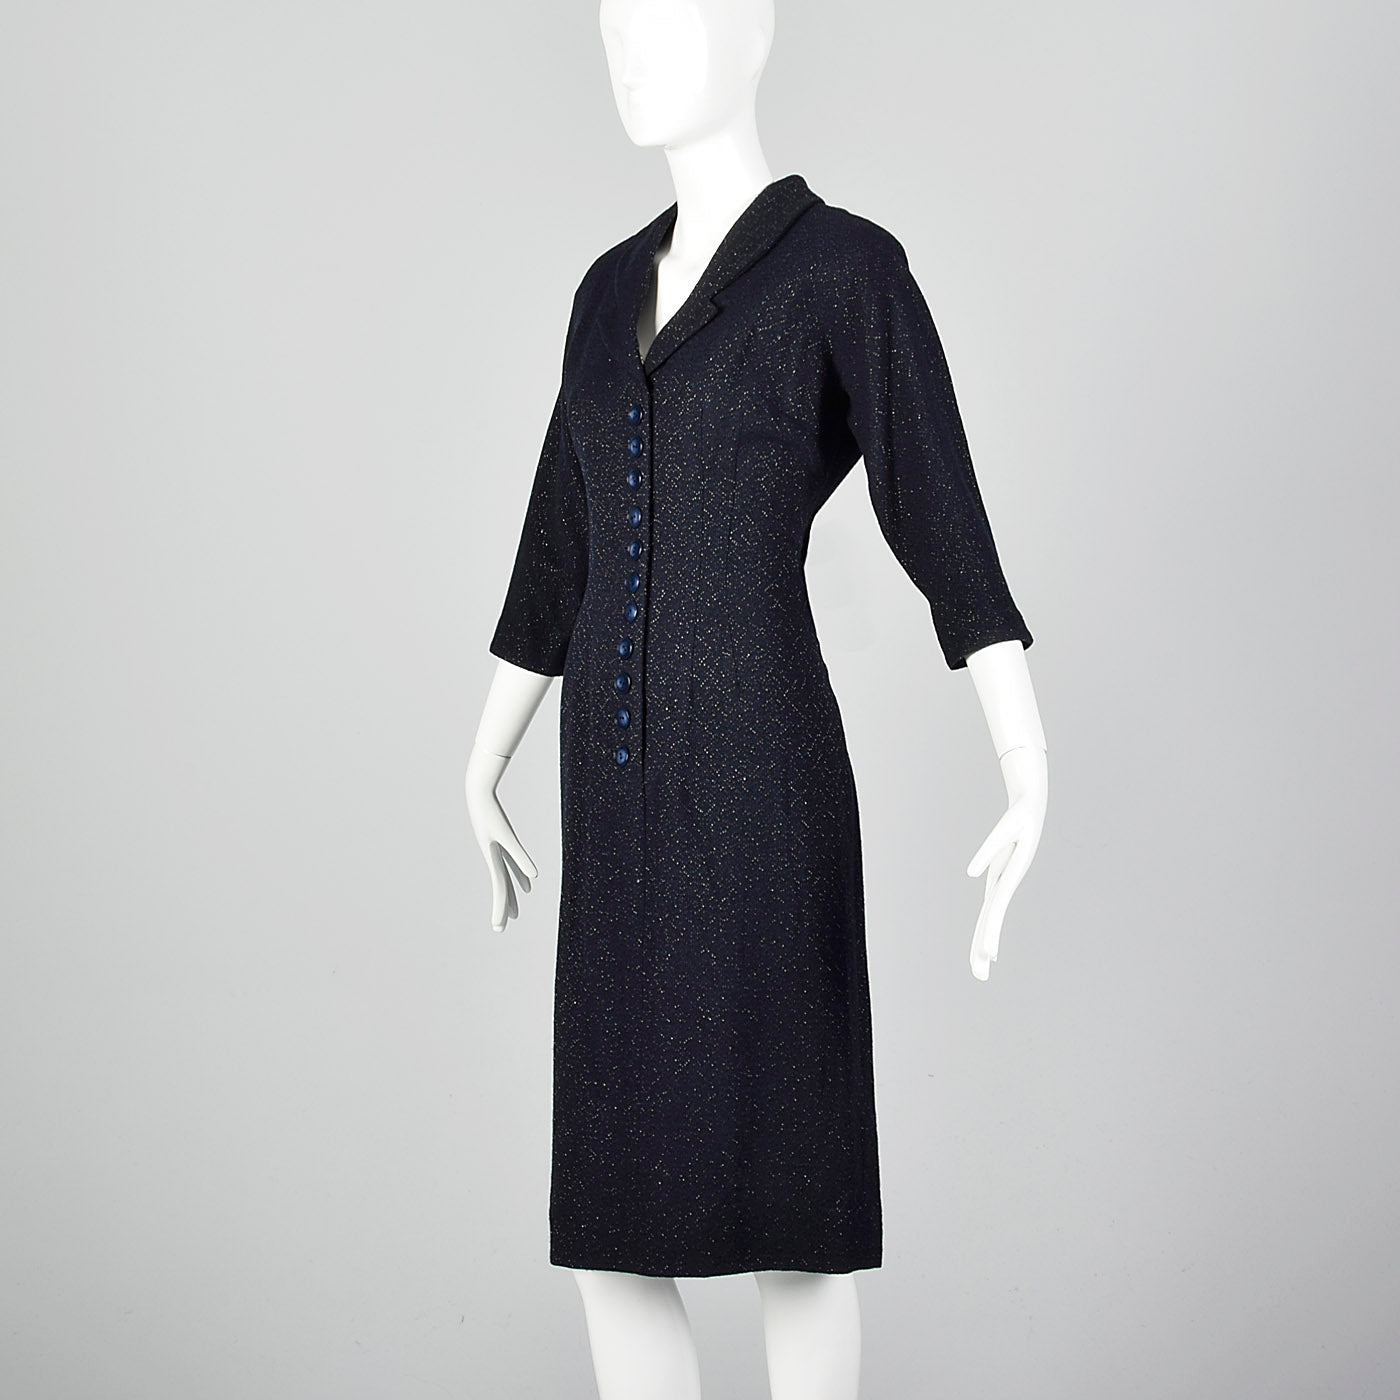 1950s Navy Blue Dress with Silver Glitter Textile